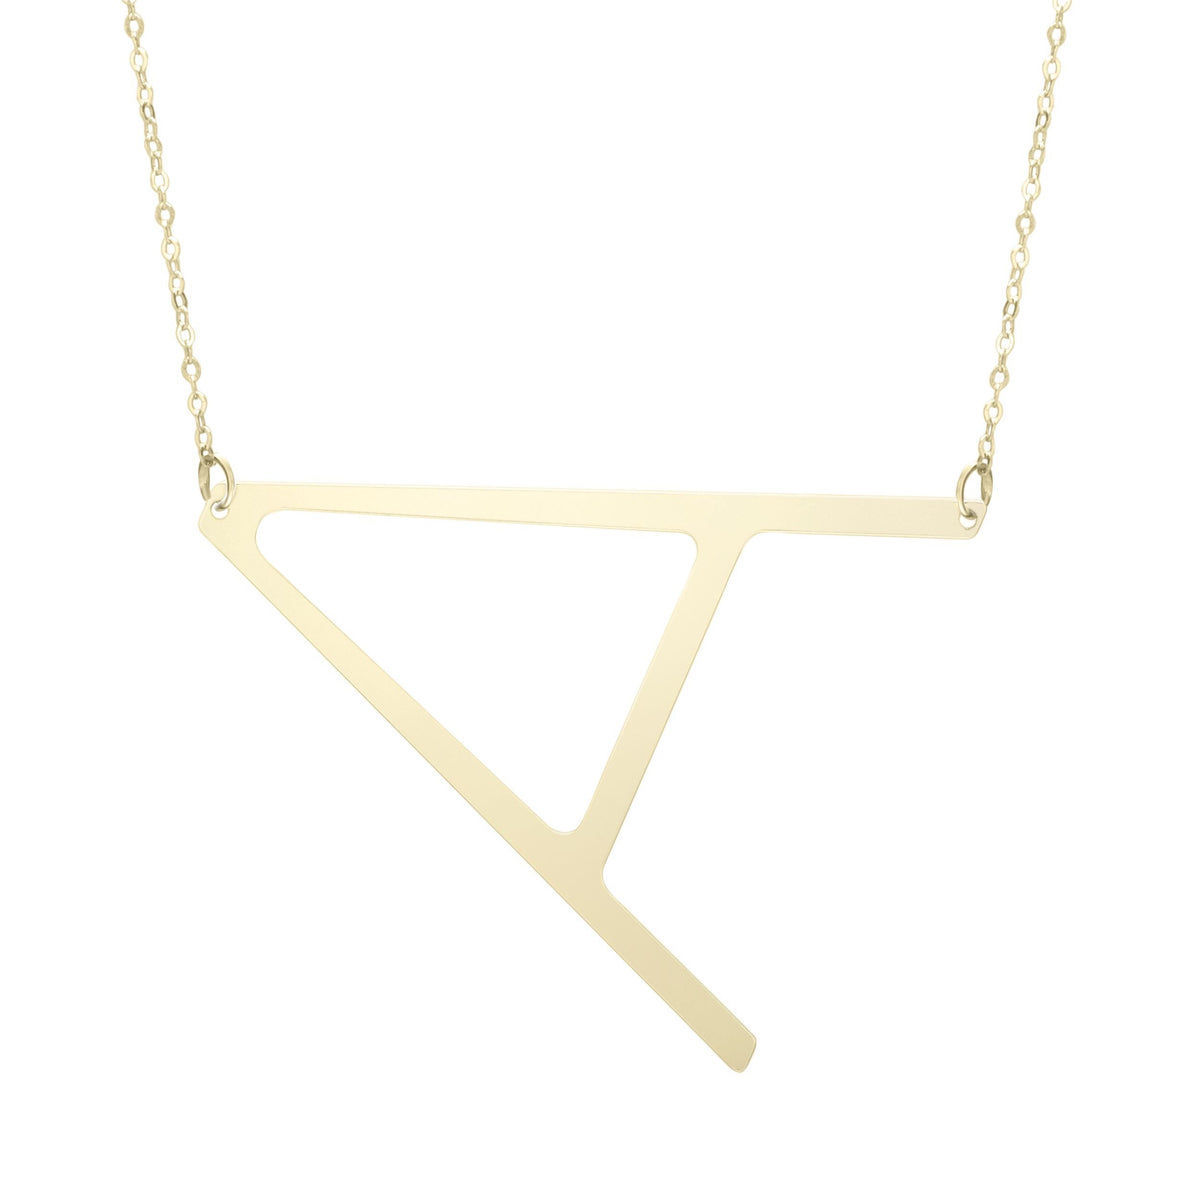 14K Yellow Gold Polished Initial Sideways Necklace